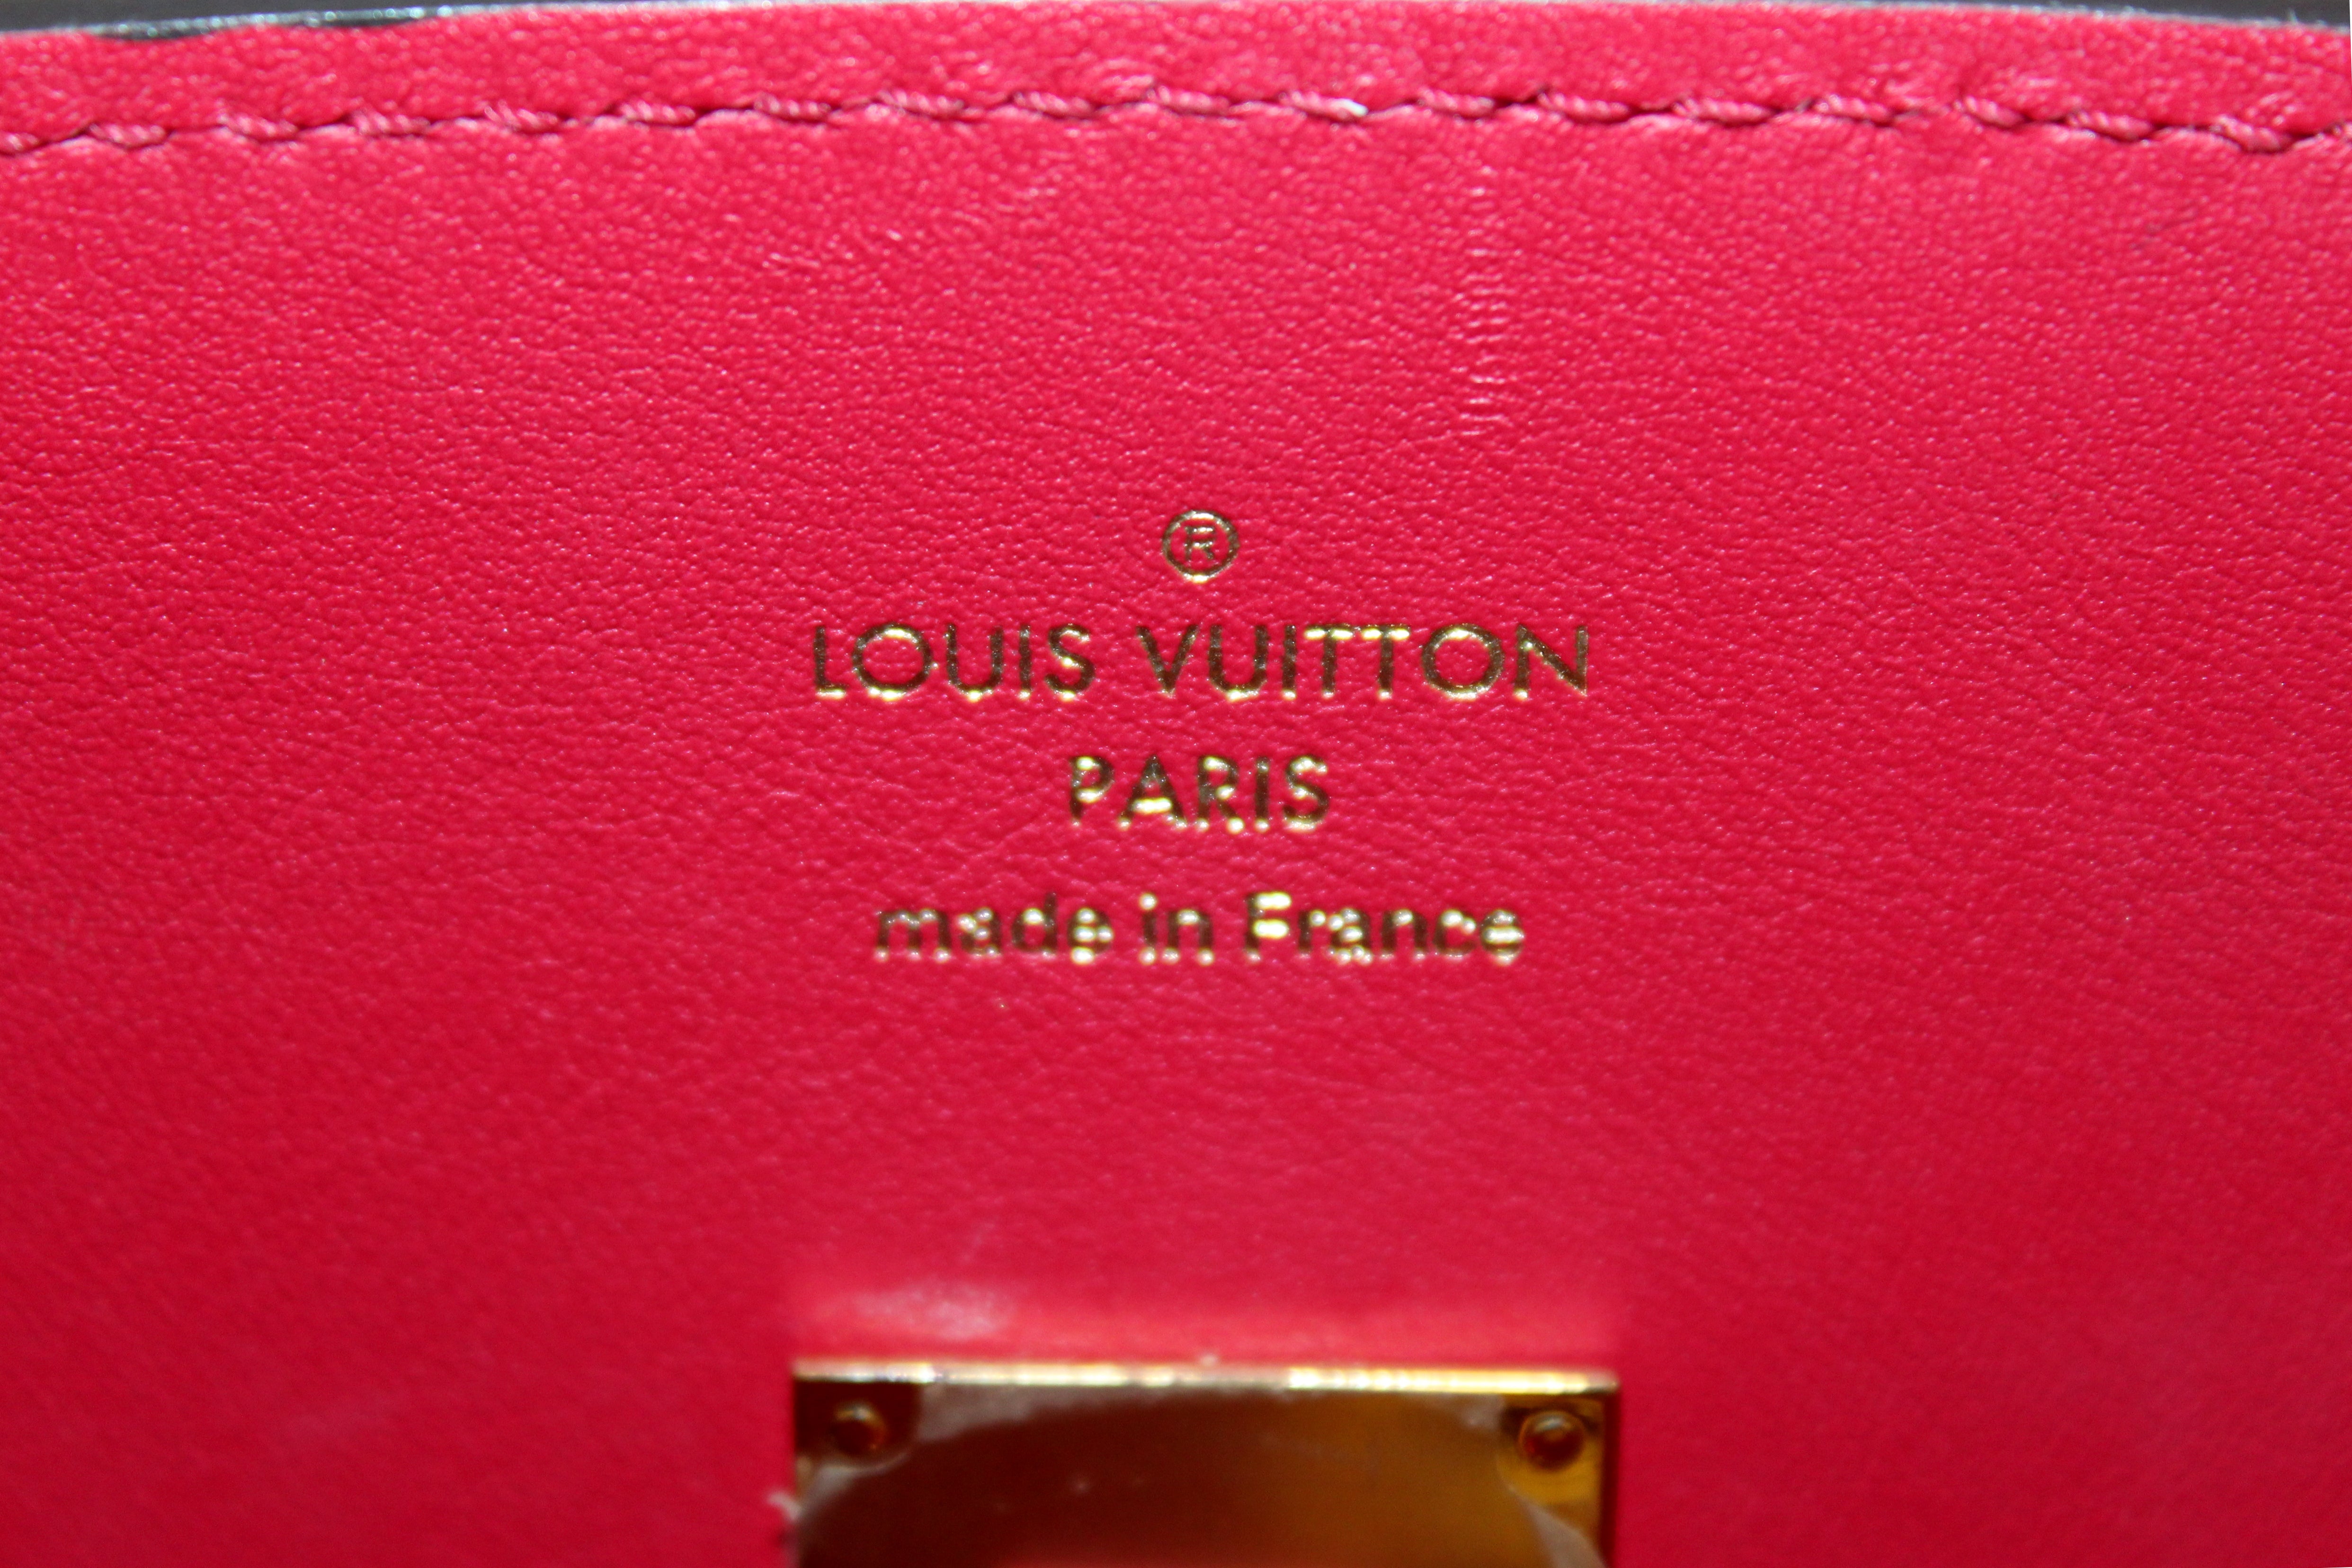 Louis Vuitton Milla Pm in Red